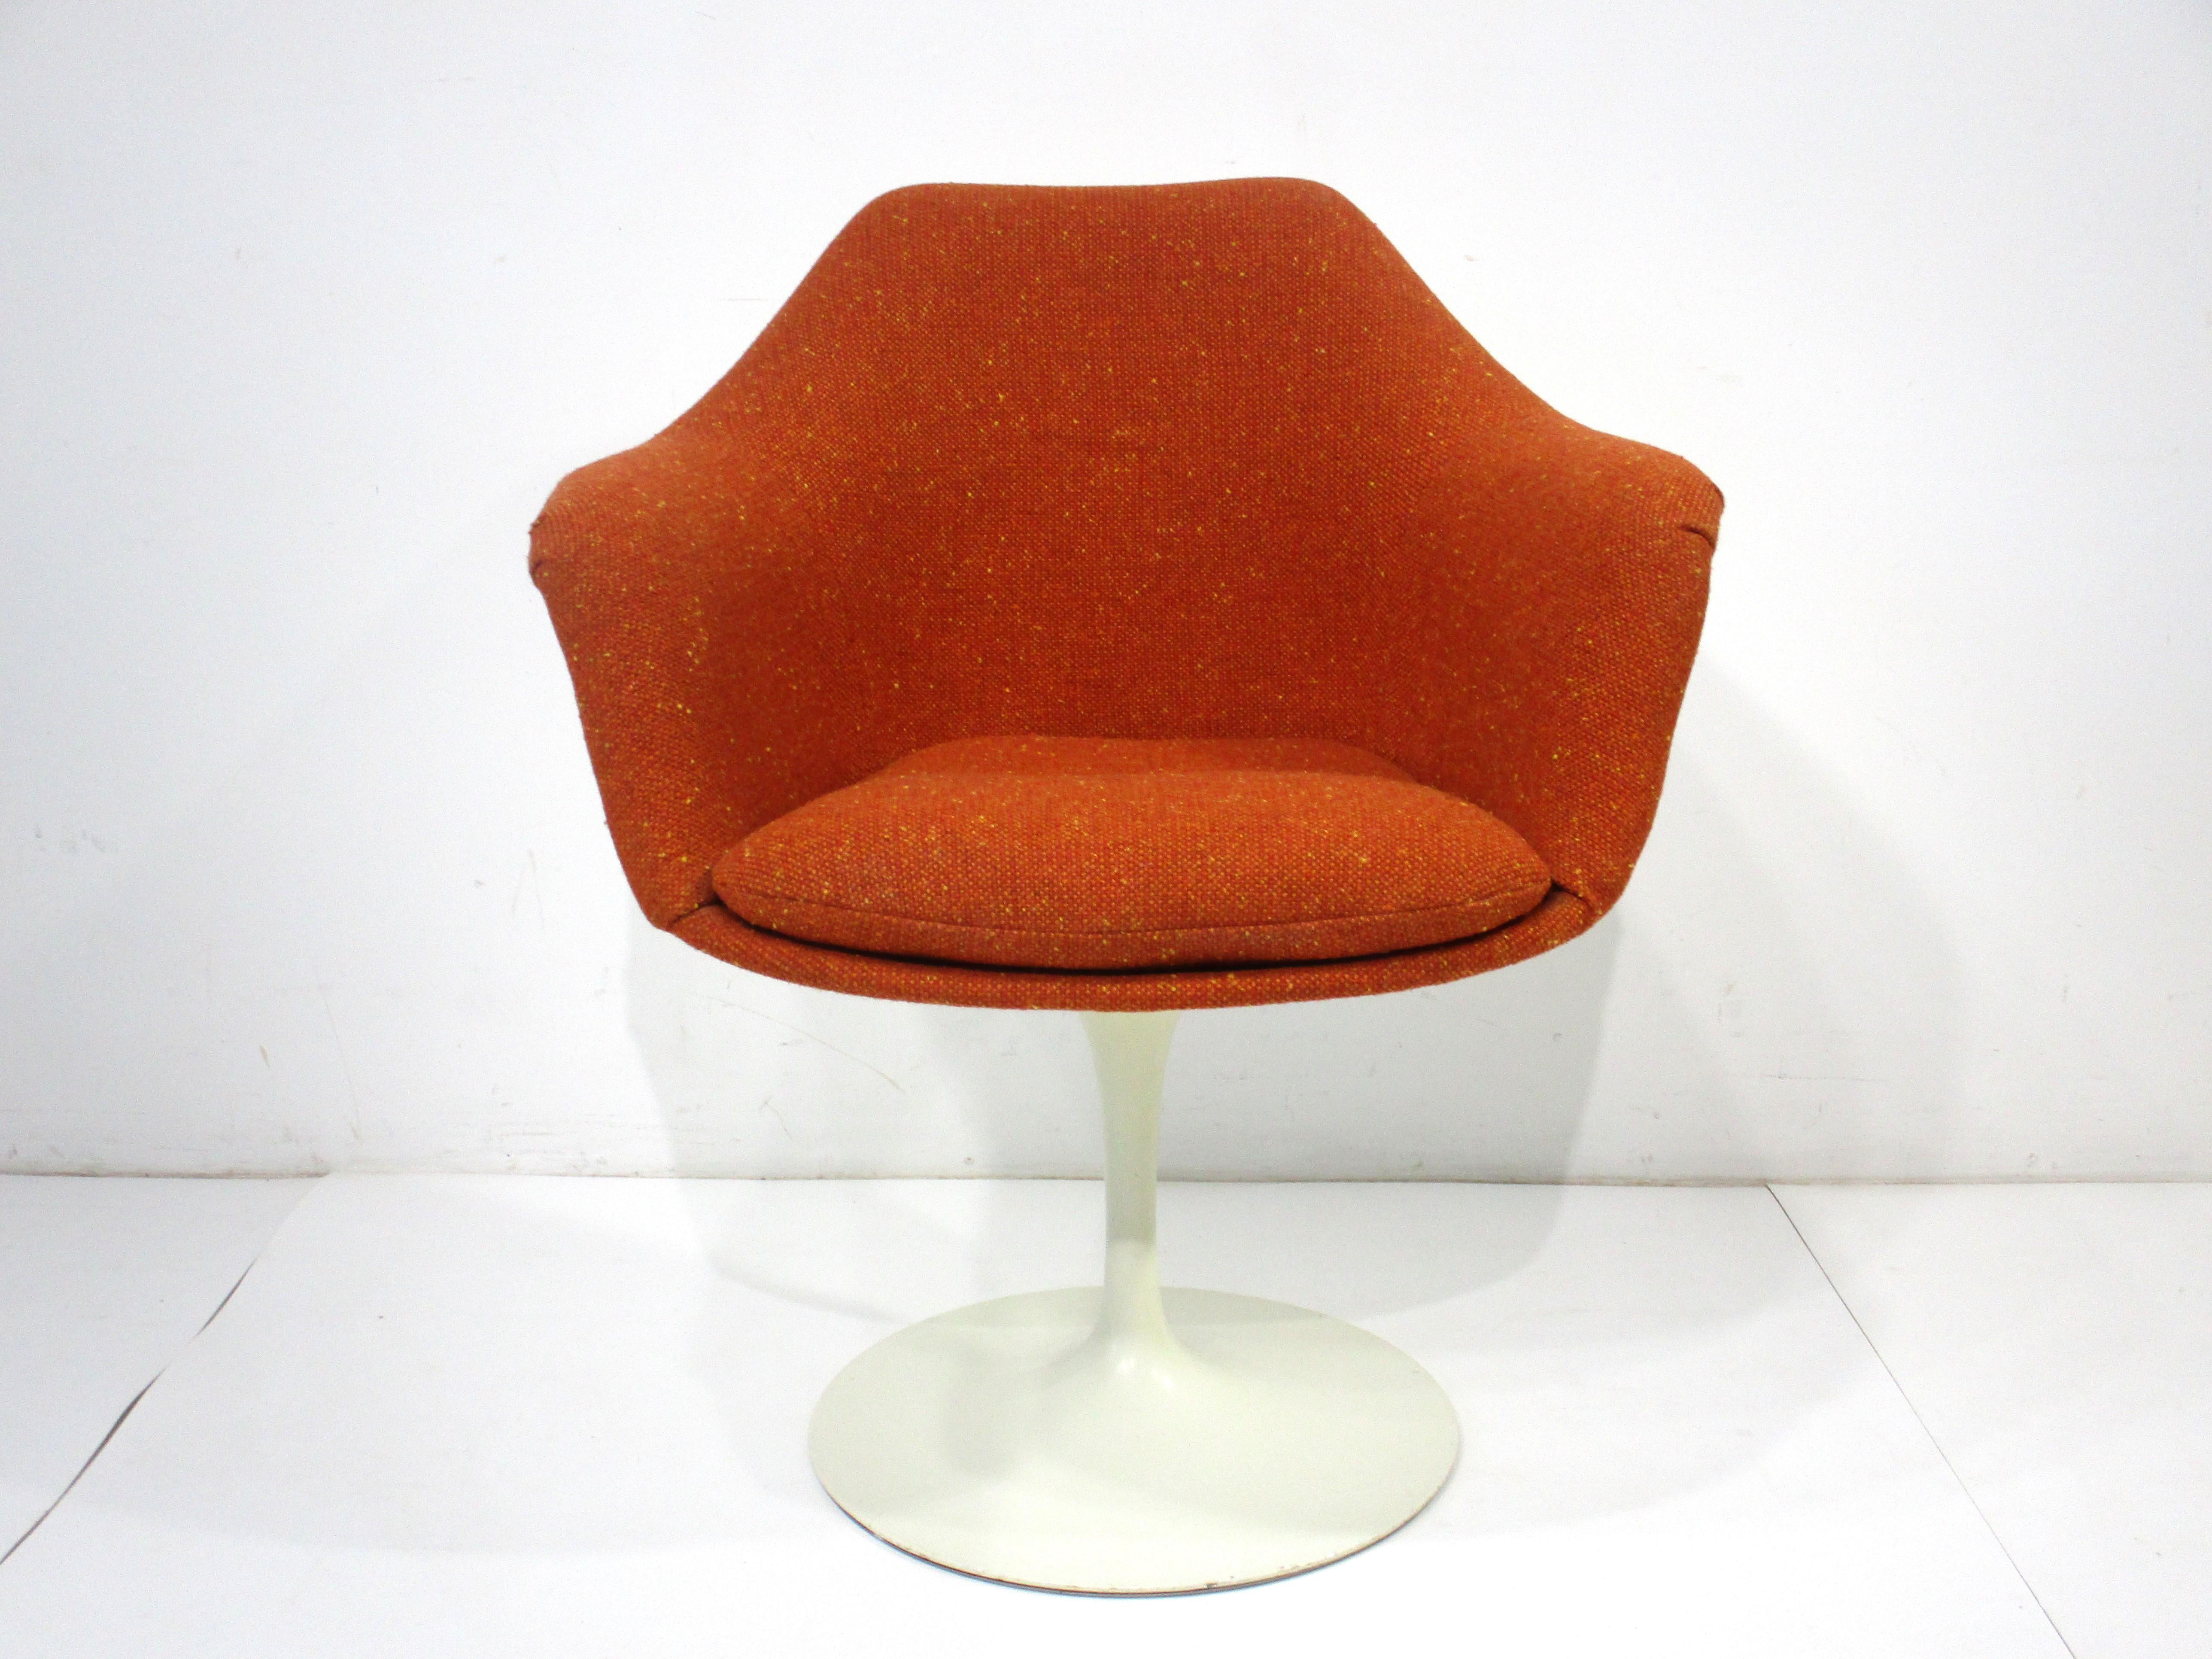 A special order upholstered tulip arm chair with nice curved back and supportive bottom seat cushion . This is a very comfortable chair for hours of relaxing at home or in the office with a white non swiveling base . Designed by Eero Saarinen for